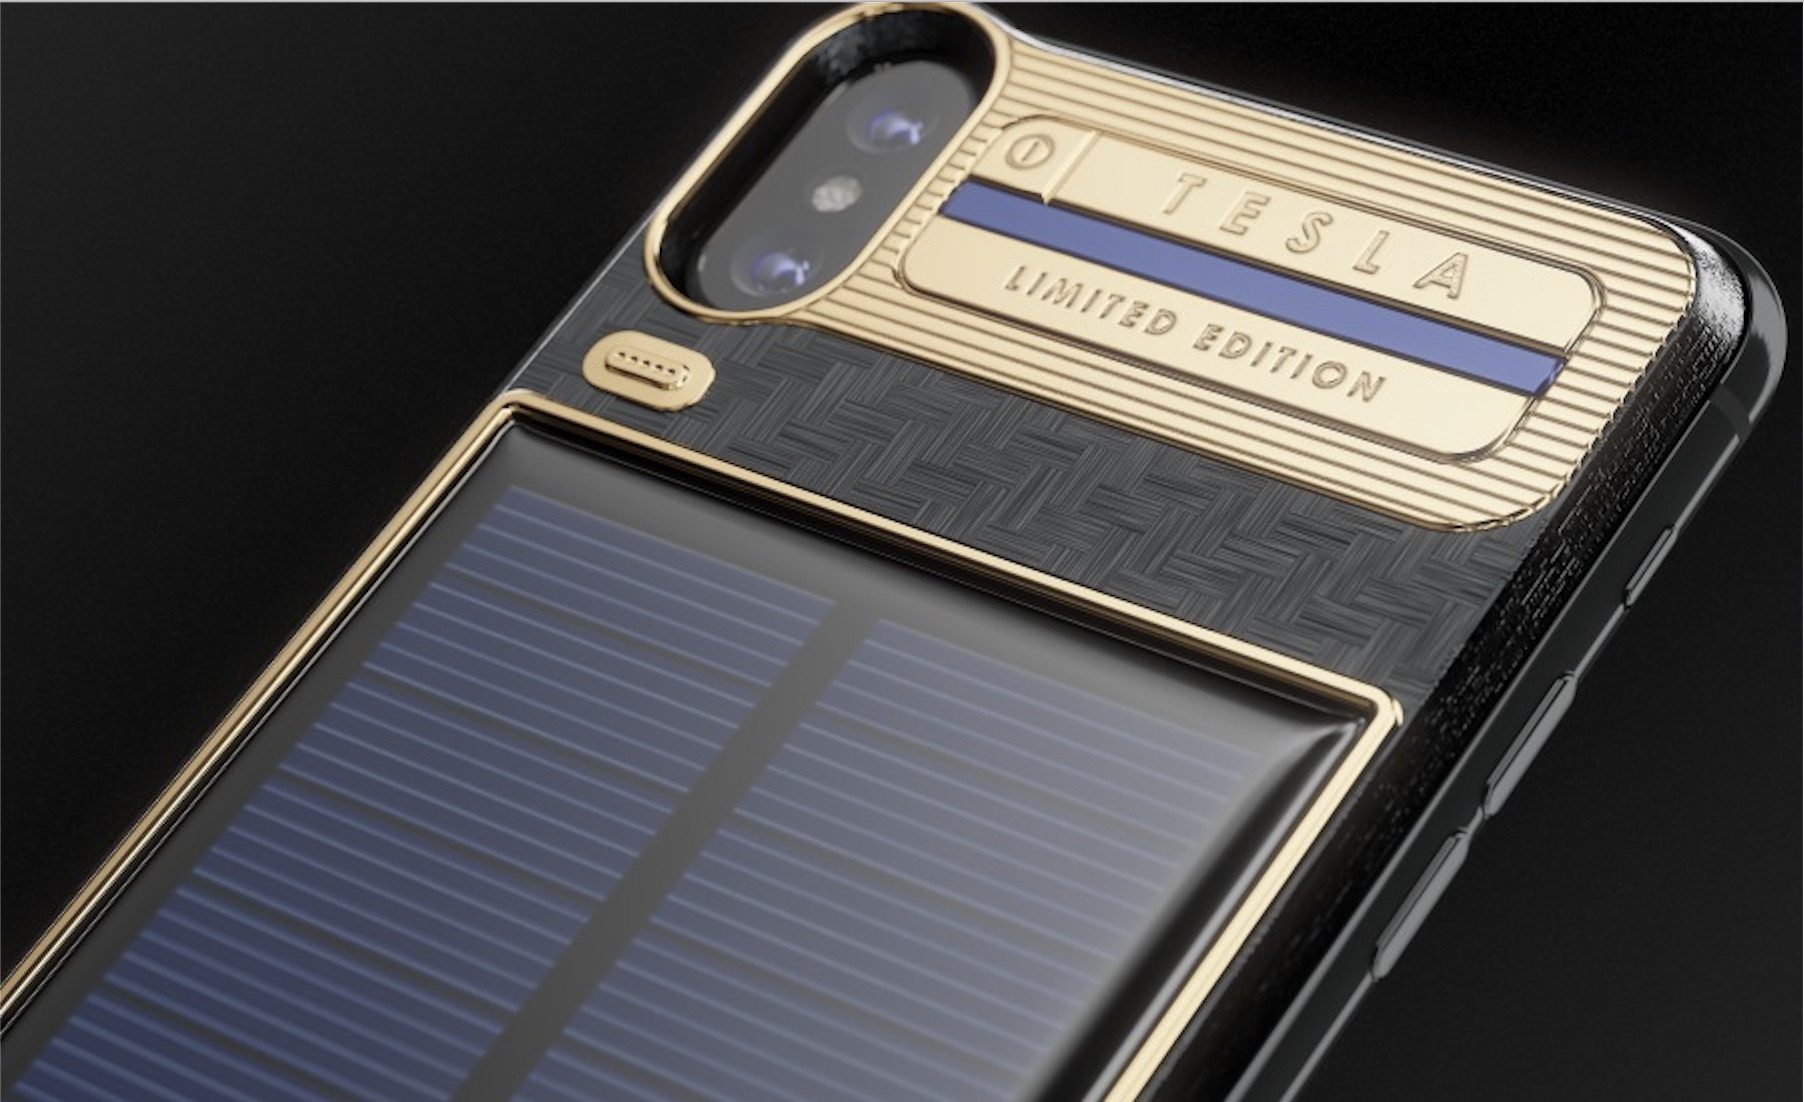 iPhone X Luxury Battery Case with Integrated Solar Panel Hits Market